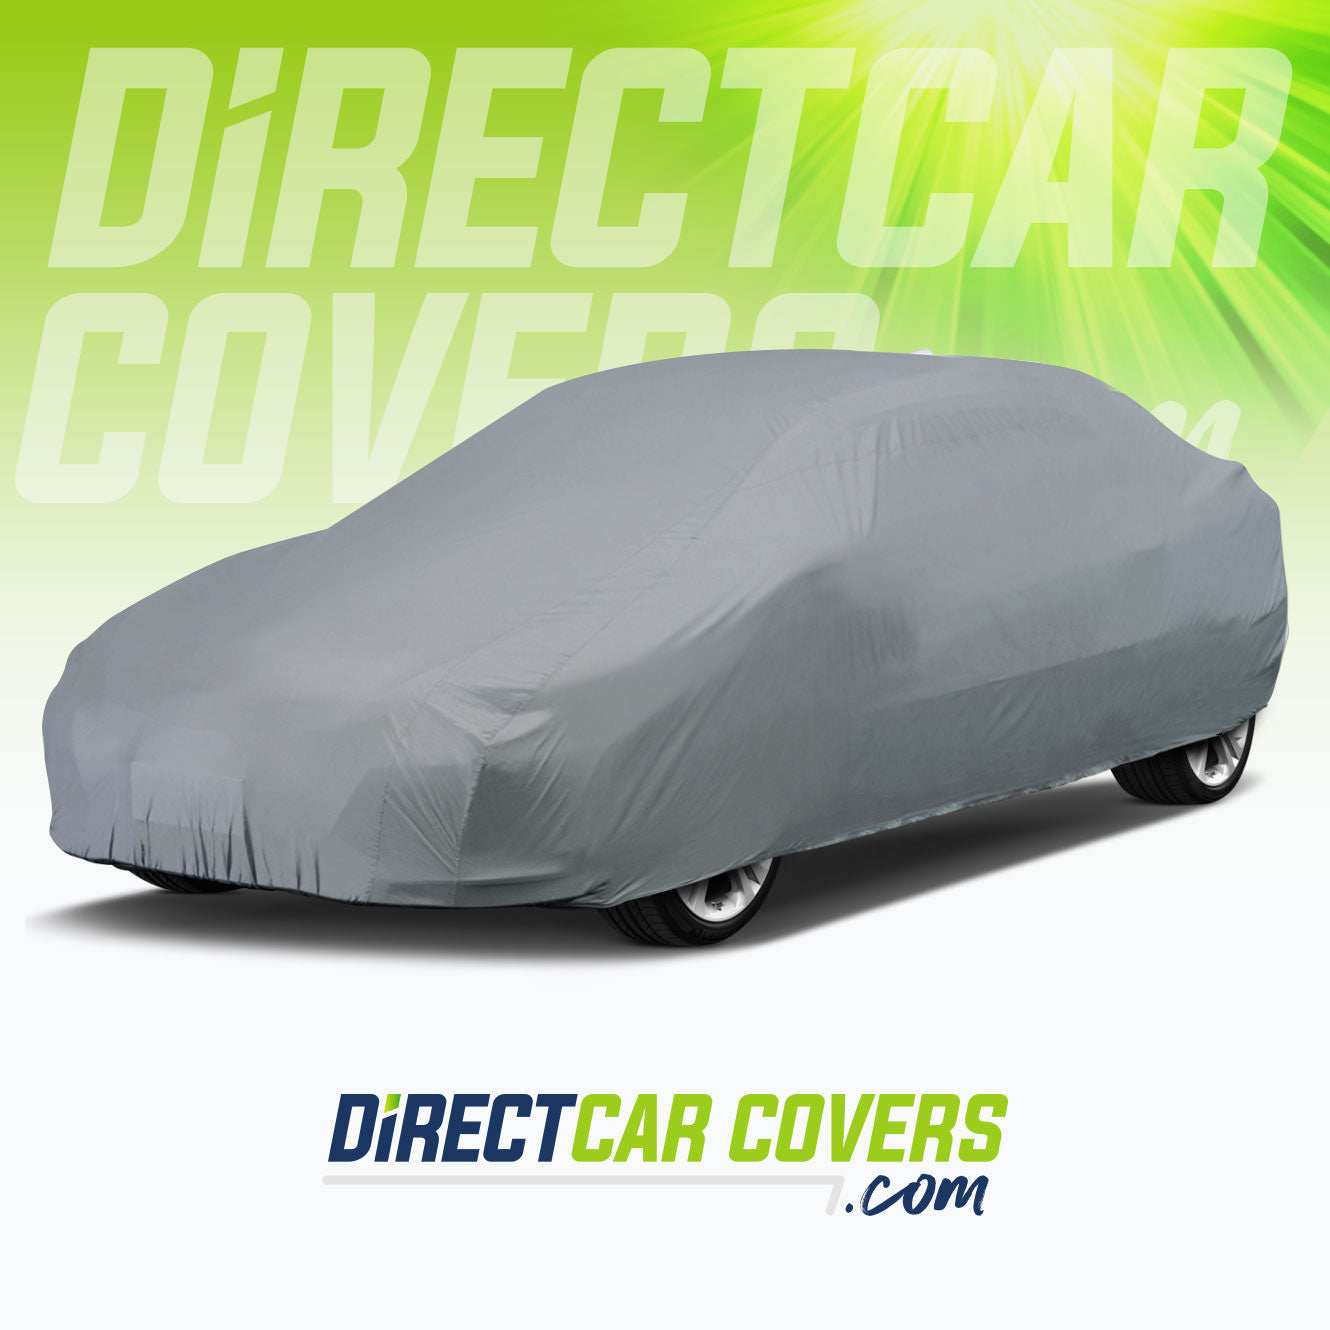 Volkswagen Eos 4 Layer Car Cover Fitted Outdoor Water Proof Rain Snow Sun  Dust